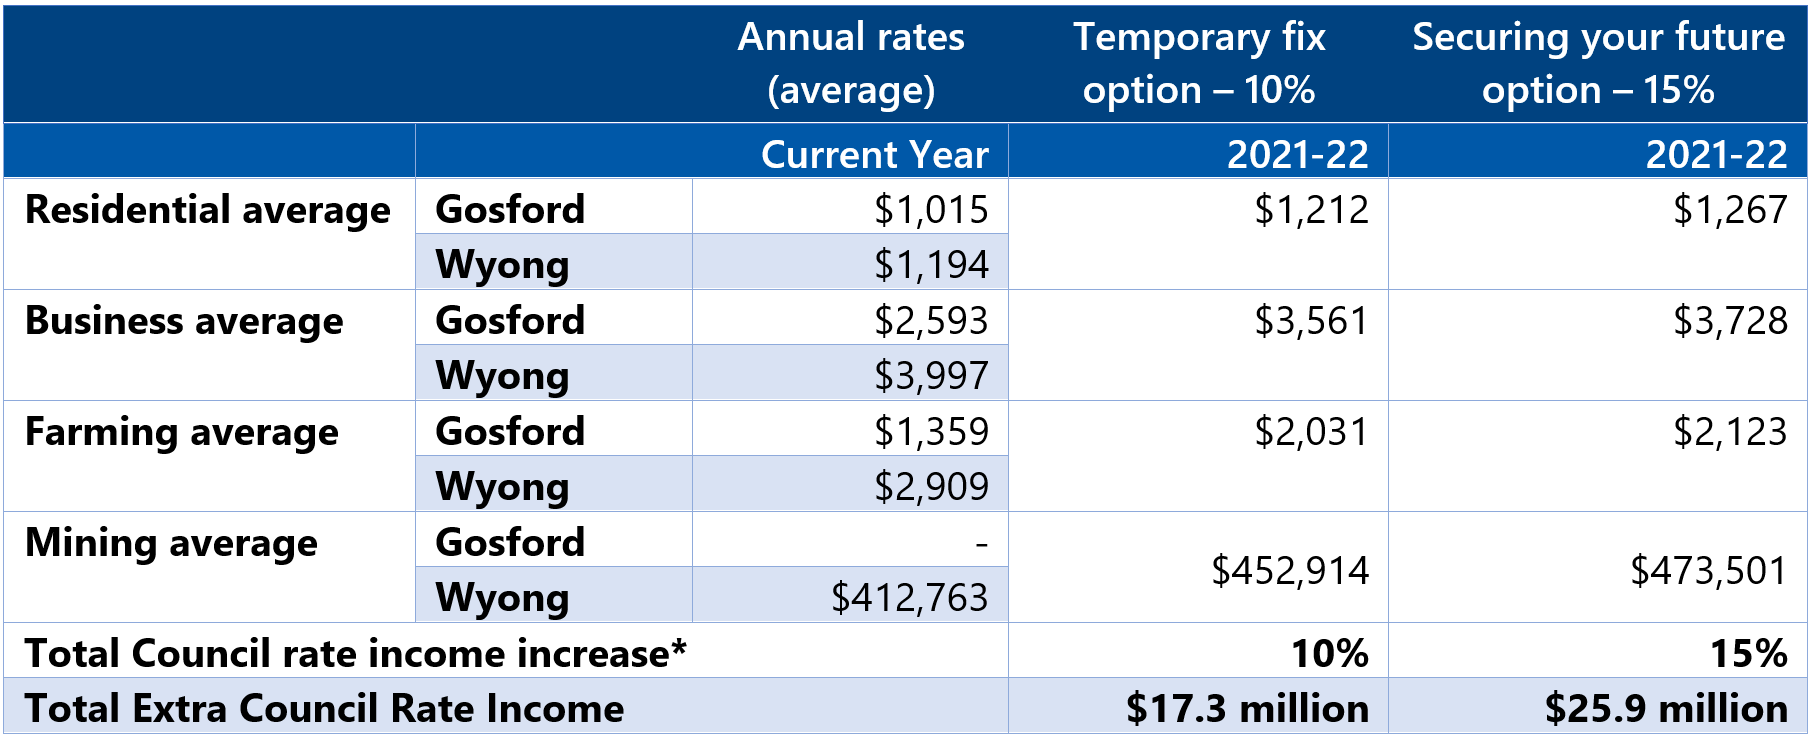 Table showing the impact of the proposed changes for the 2021-22 financial year, for the average ratepayer.